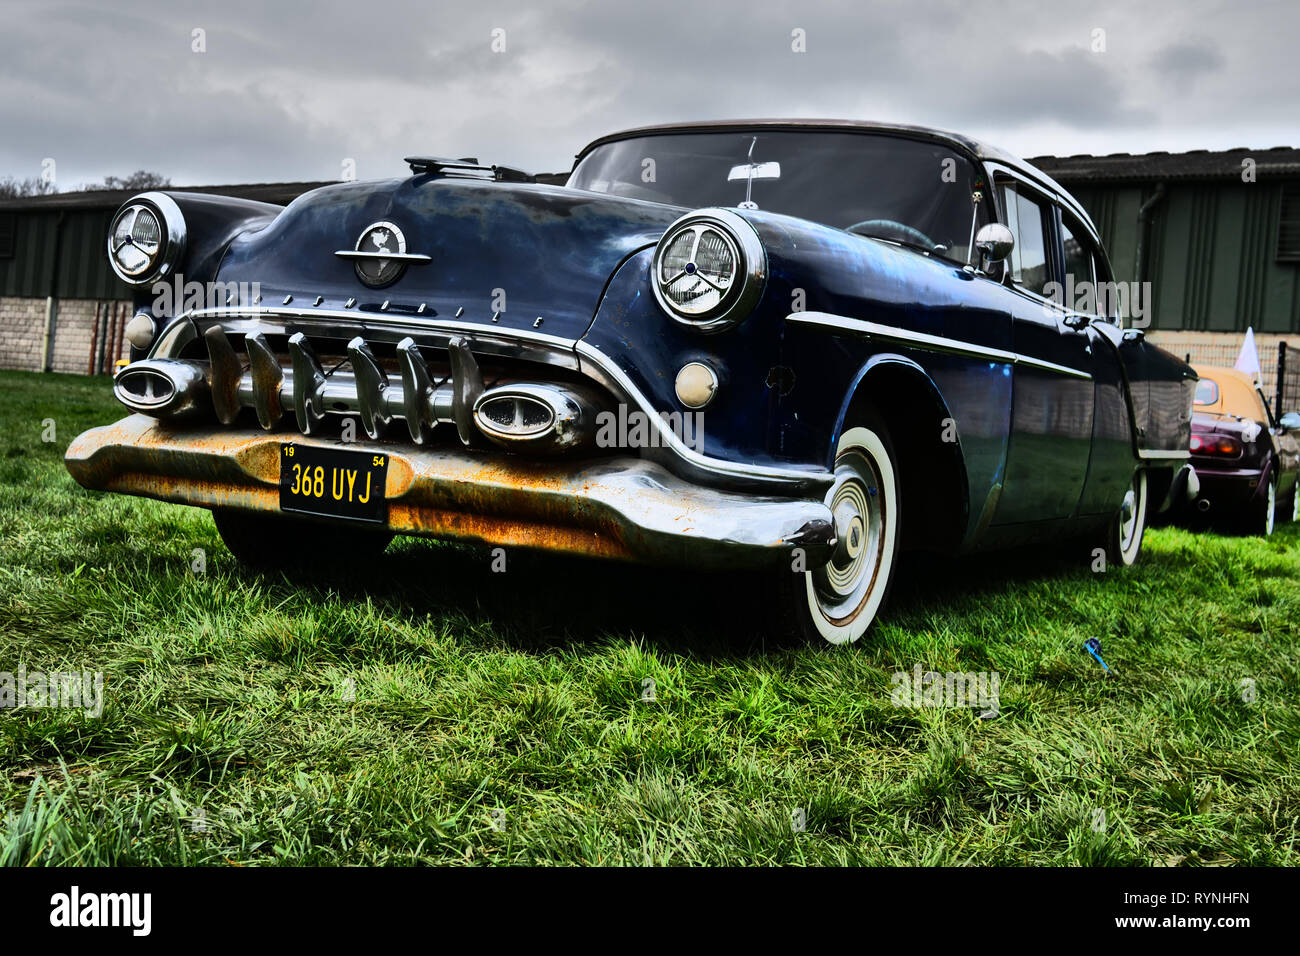 Classic American 1950s 1960s cars, on show at Three Counties Showground, Malvern, England, UK. Stock Photo